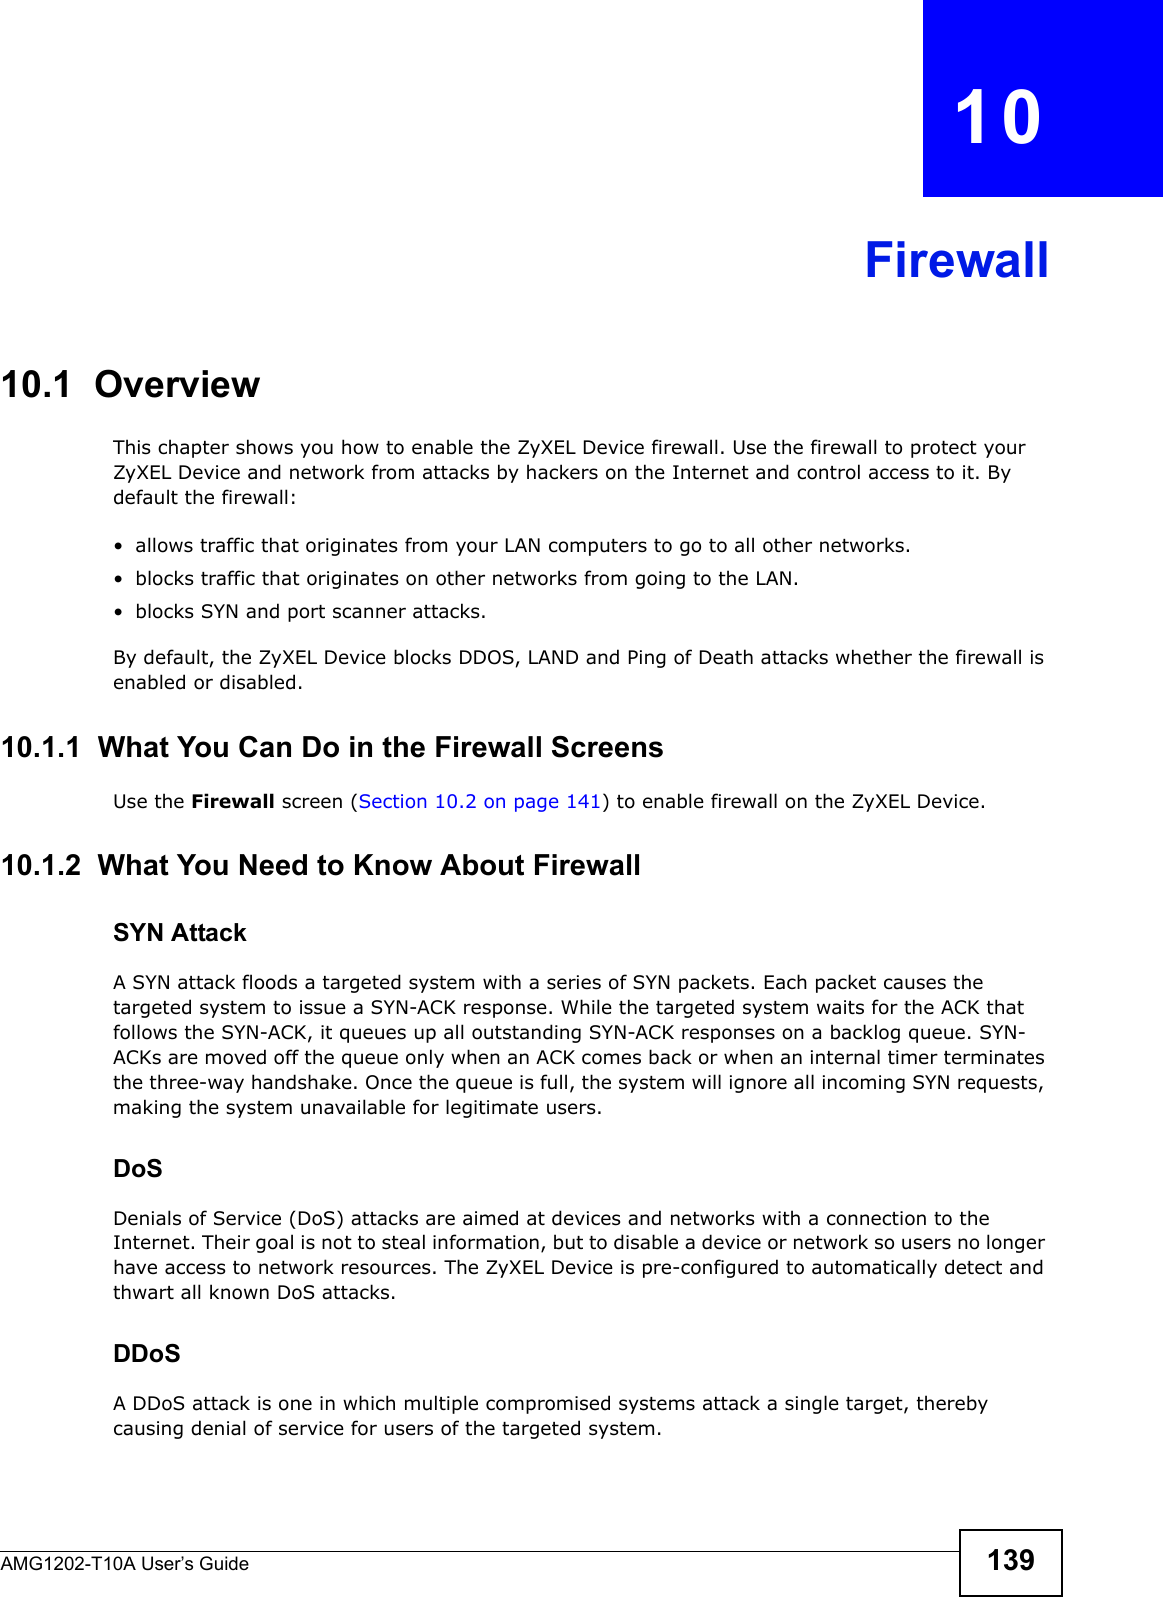 AMG1202-T10A User’s Guide 139CHAPTER   10Firewall10.1  OverviewThis chapter shows you how to enable the ZyXEL Device firewall. Use the firewall to protect your ZyXEL Device and network from attacks by hackers on the Internet and control access to it. By default the firewall:• allows traffic that originates from your LAN computers to go to all other networks. • blocks traffic that originates on other networks from going to the LAN.• blocks SYN and port scanner attacks.By default, the ZyXEL Device blocks DDOS, LAND and Ping of Death attacks whether the firewall is enabled or disabled.10.1.1  What You Can Do in the Firewall ScreensUse the Firewall screen (Section 10.2 on page 141) to enable firewall on the ZyXEL Device.10.1.2  What You Need to Know About FirewallSYN AttackA SYN attack floods a targeted system with a series of SYN packets. Each packet causes the targeted system to issue a SYN-ACK response. While the targeted system waits for the ACK that follows the SYN-ACK, it queues up all outstanding SYN-ACK responses on a backlog queue. SYN-ACKs are moved off the queue only when an ACK comes back or when an internal timer terminates the three-way handshake. Once the queue is full, the system will ignore all incoming SYN requests, making the system unavailable for legitimate users.DoSDenials of Service (DoS) attacks are aimed at devices and networks with a connection to the Internet. Their goal is not to steal information, but to disable a device or network so users no longer have access to network resources. The ZyXEL Device is pre-configured to automatically detect and thwart all known DoS attacks.DDoSA DDoS attack is one in which multiple compromised systems attack a single target, thereby causing denial of service for users of the targeted system.